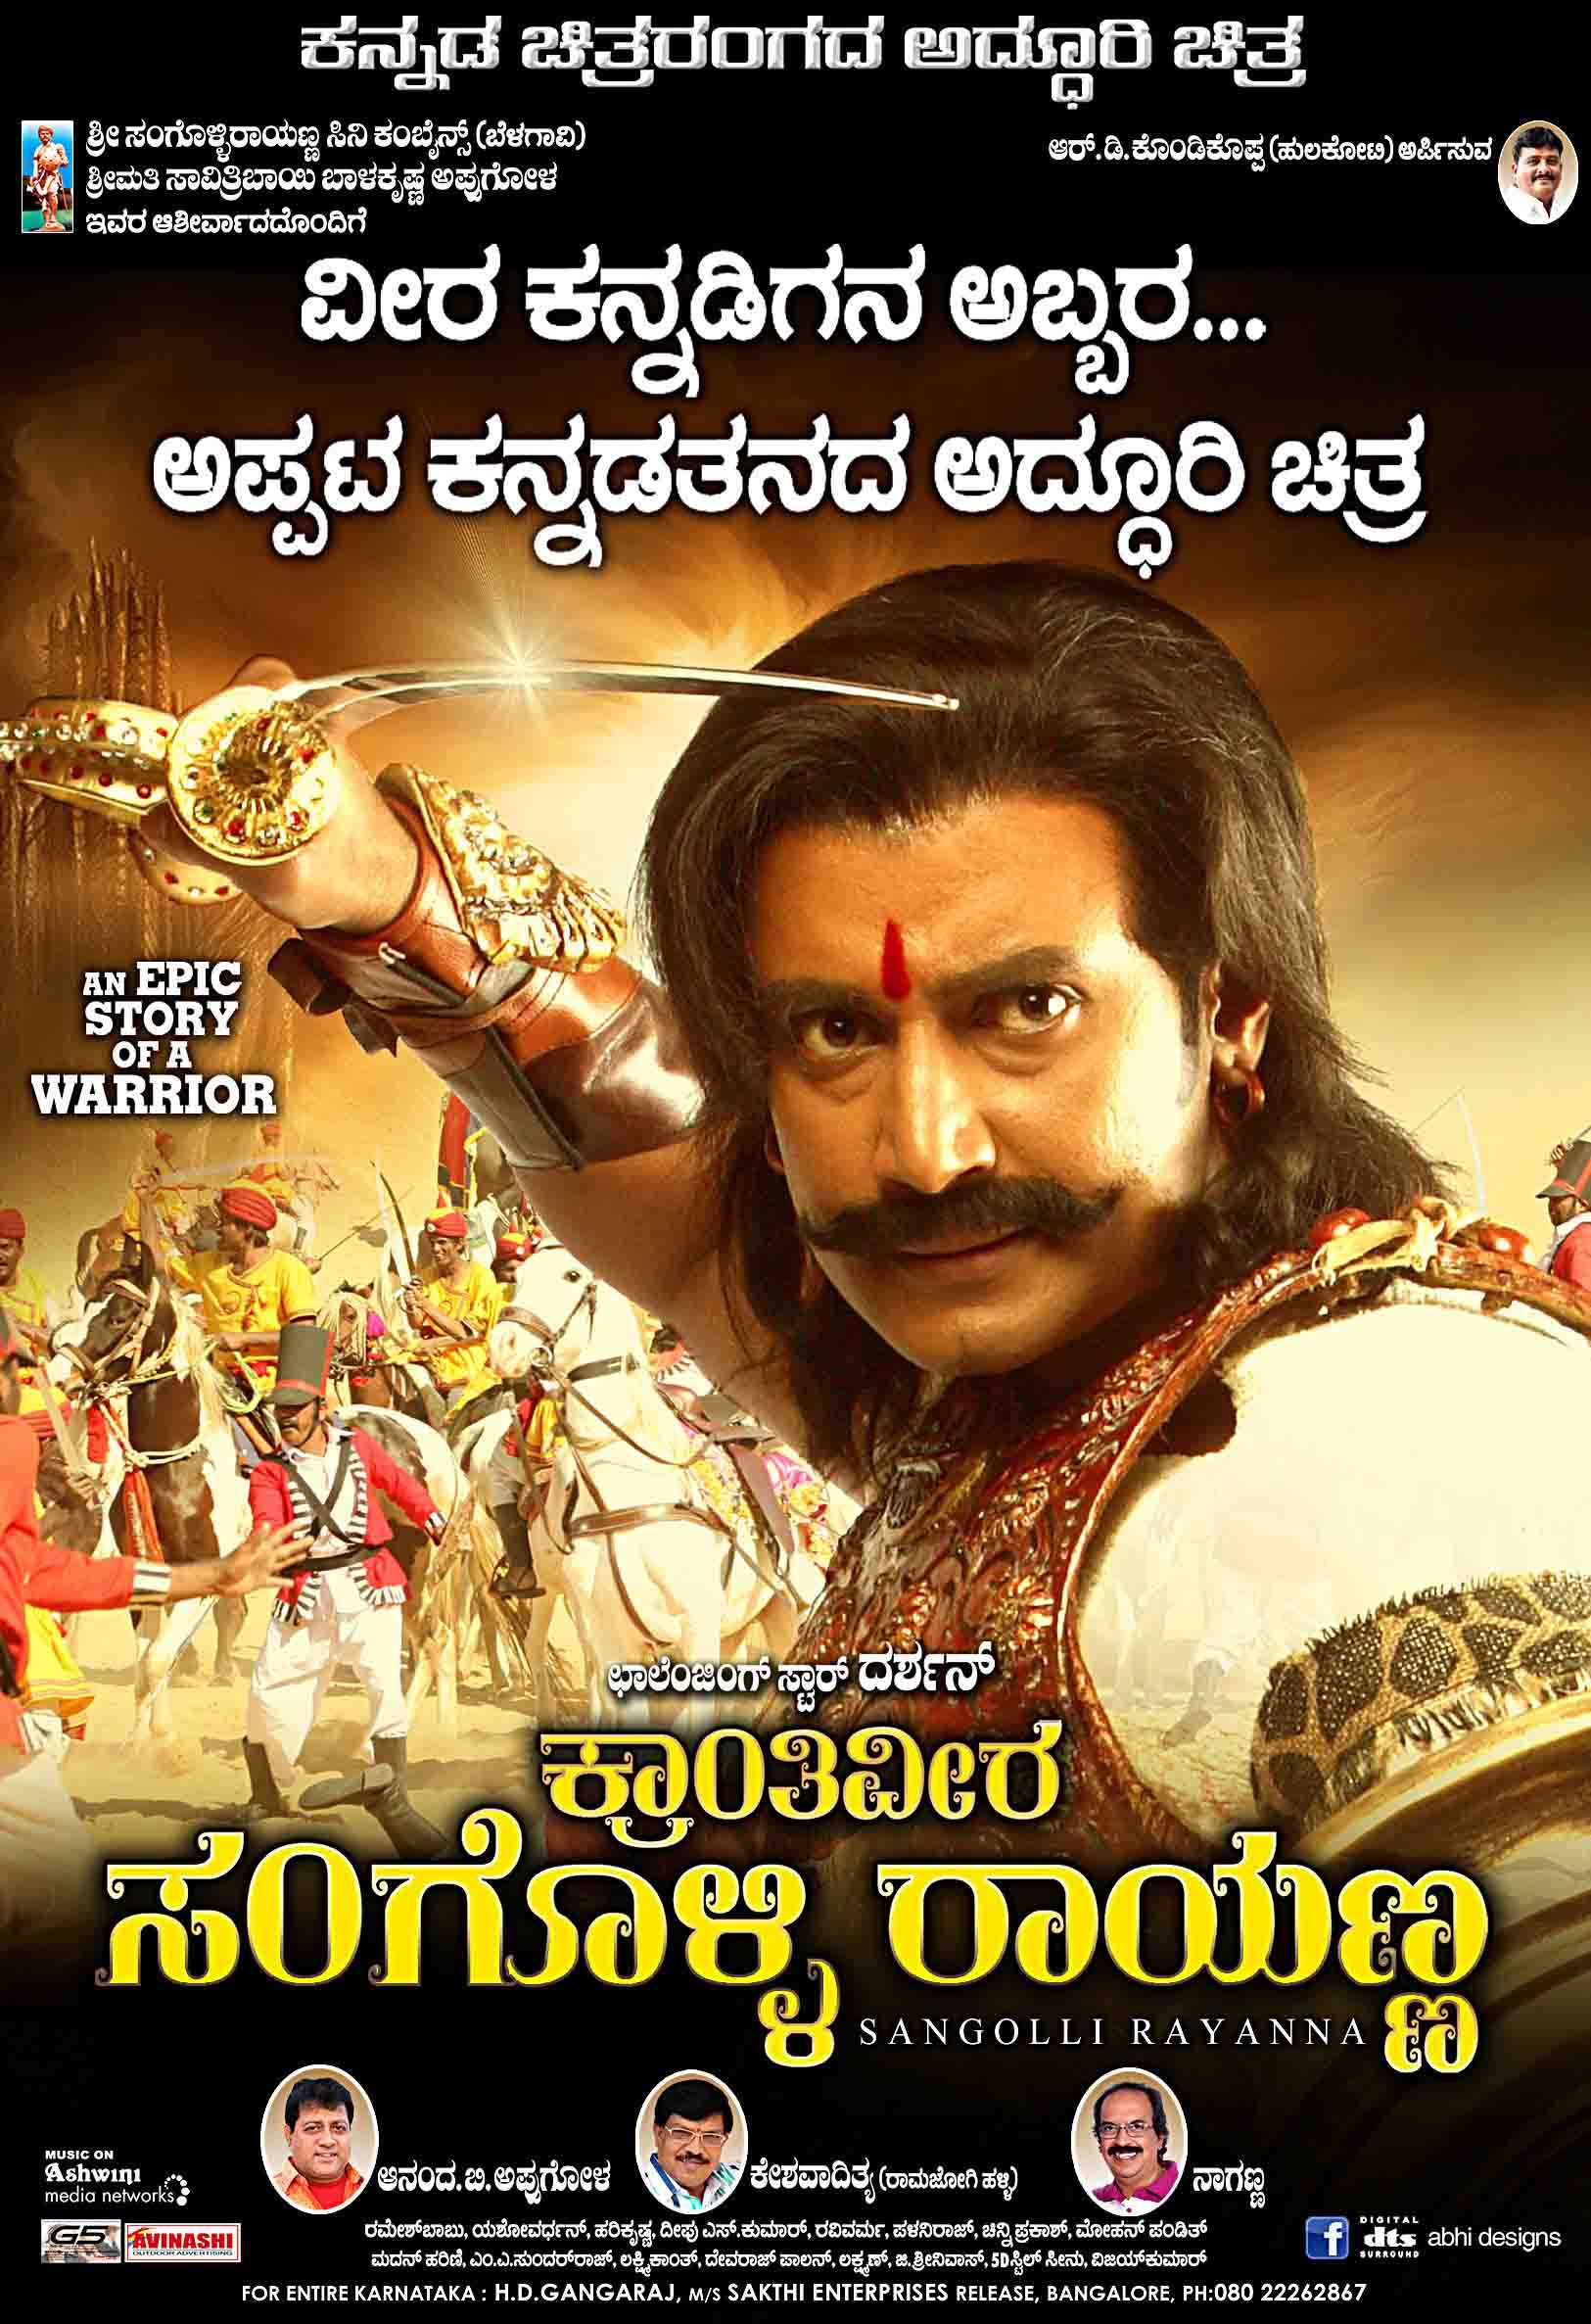 Mega Sized Movie Poster Image for Sangolli Rayanna (#52 of 79)